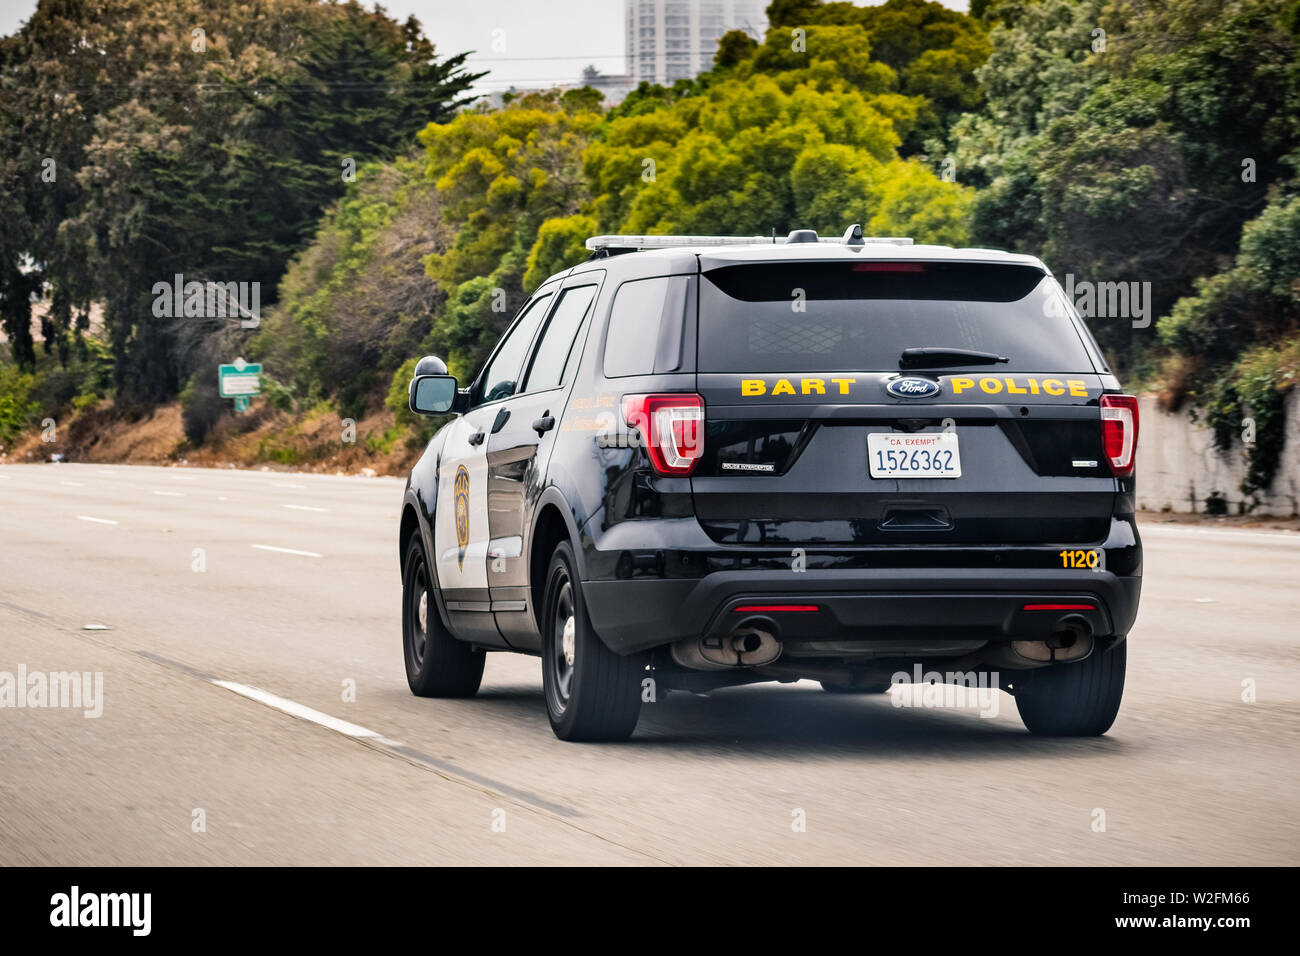 July 4, 2019 San Francisco / CA / USA - BART police vehicle driving on the freeway; BART police is the transit police agency of the BART rail system Stock Photo